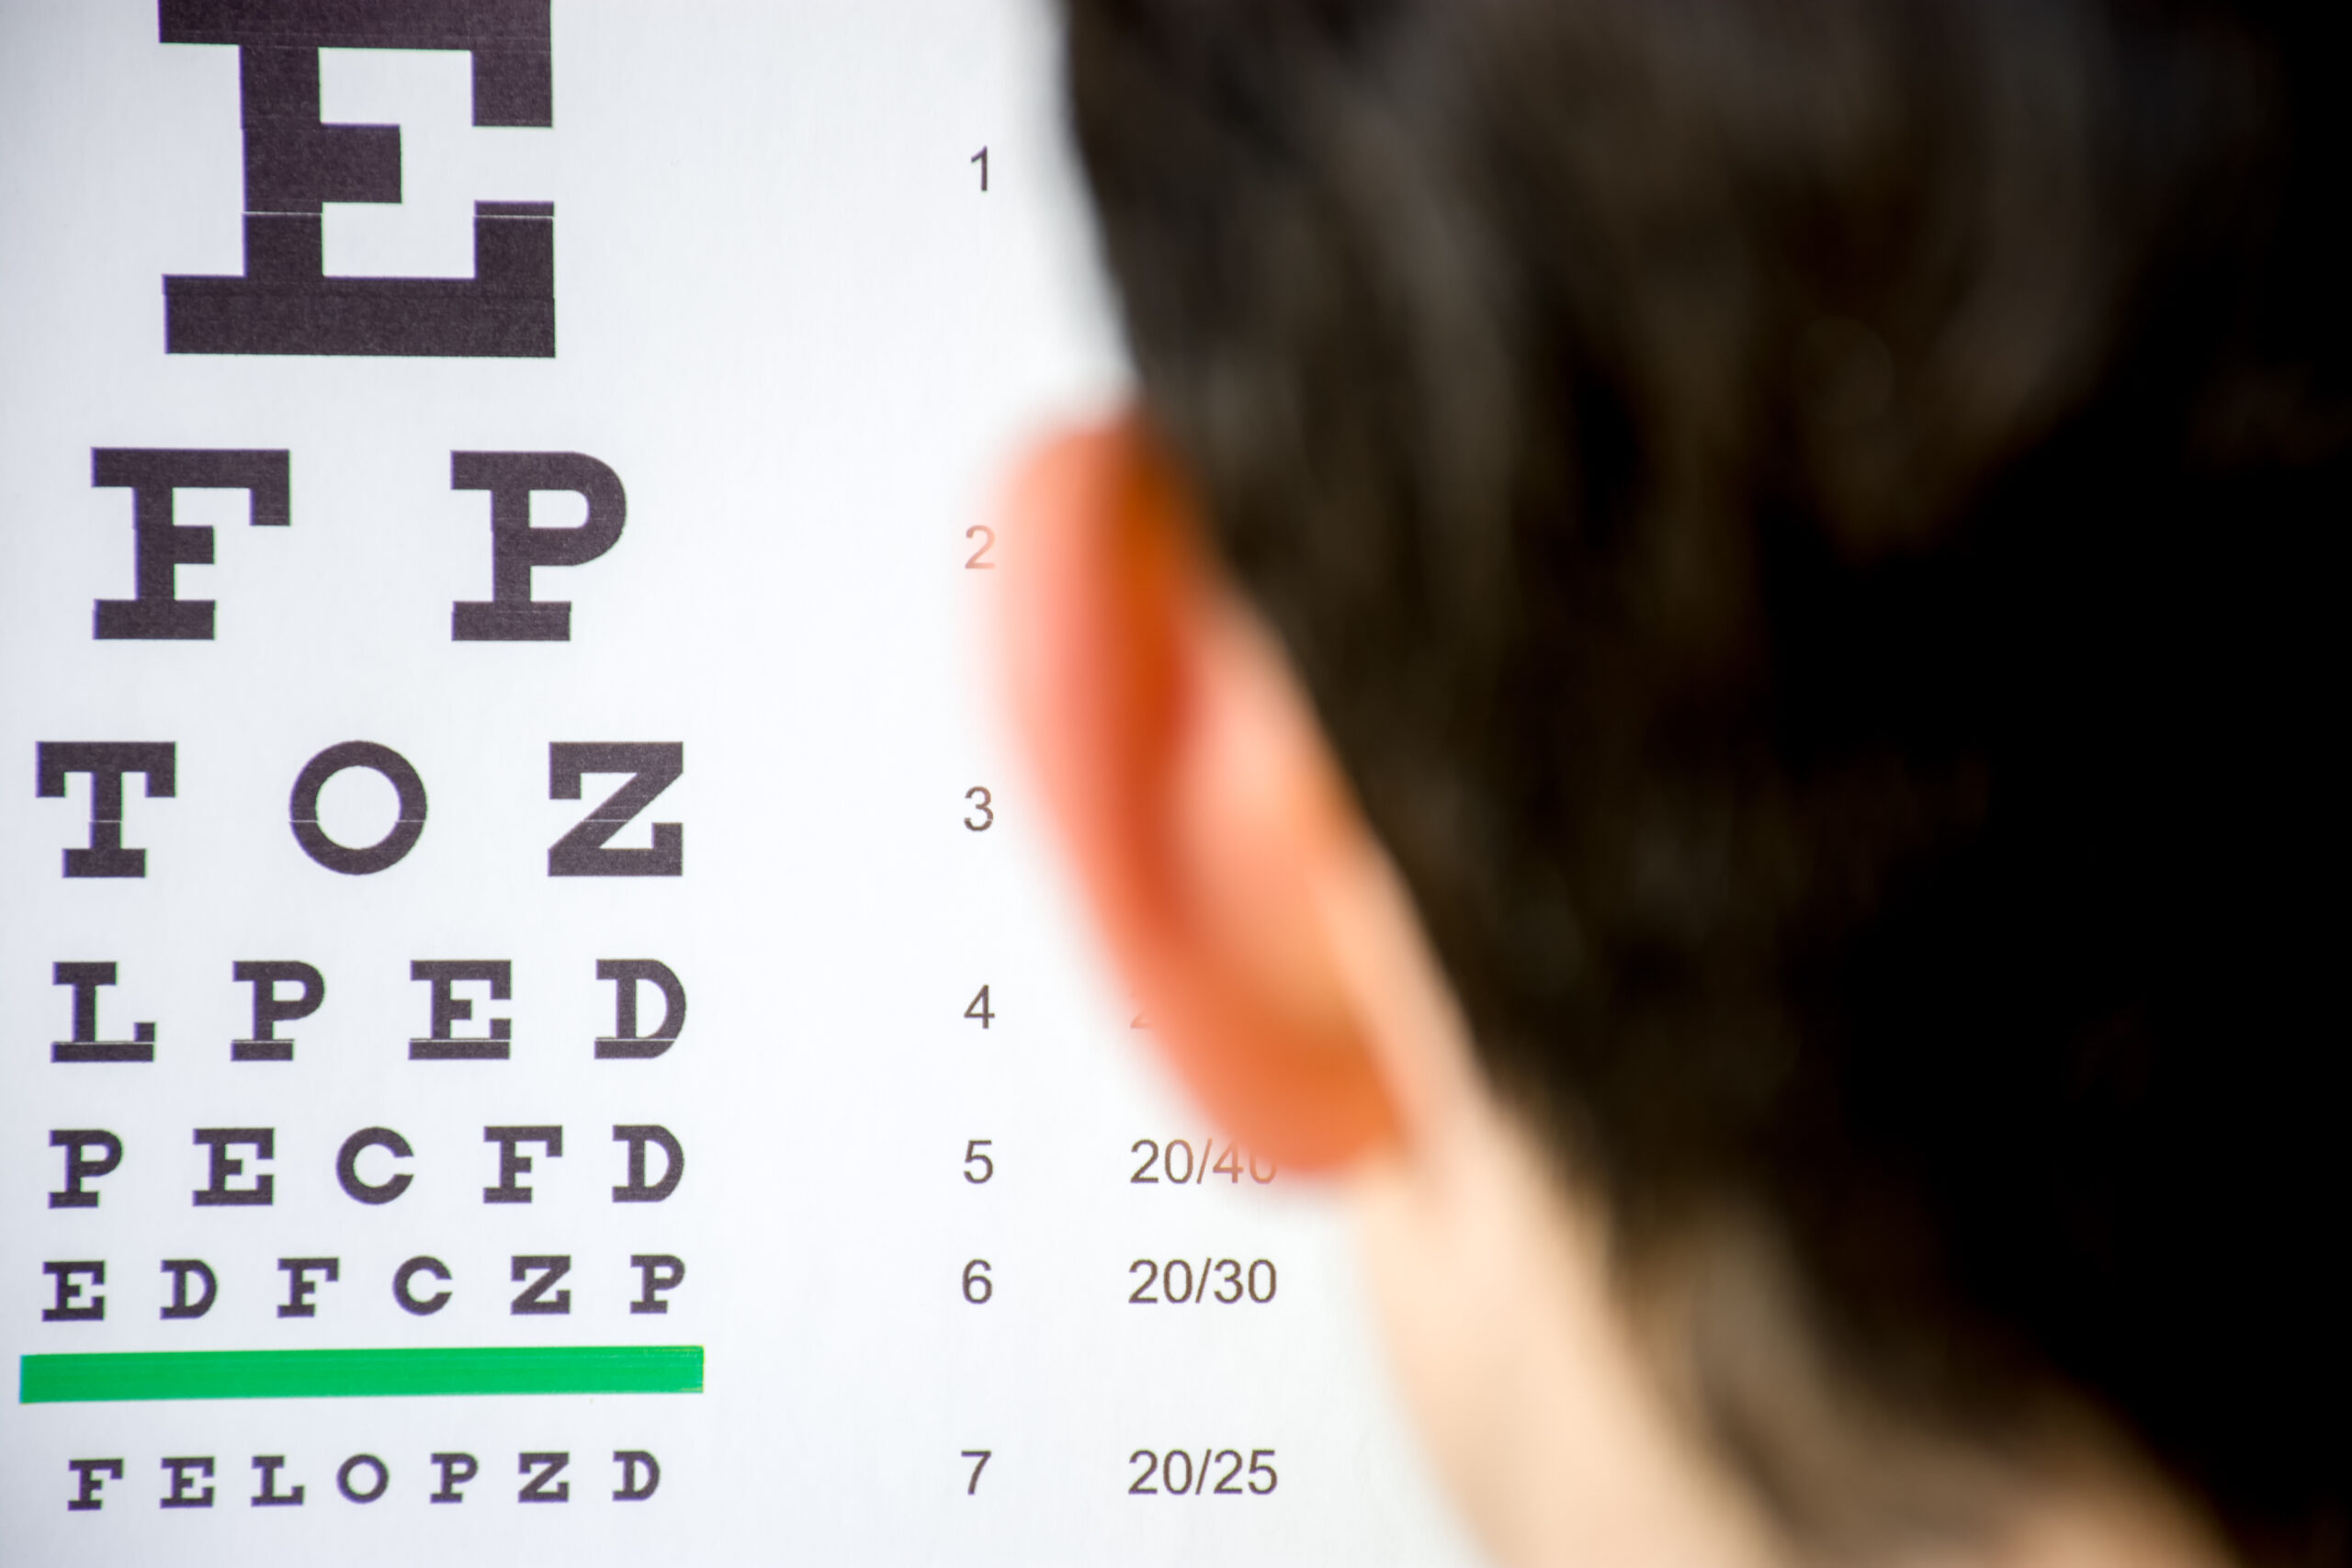 Check visual acuity or ophthalmologist or optometrist visit conc